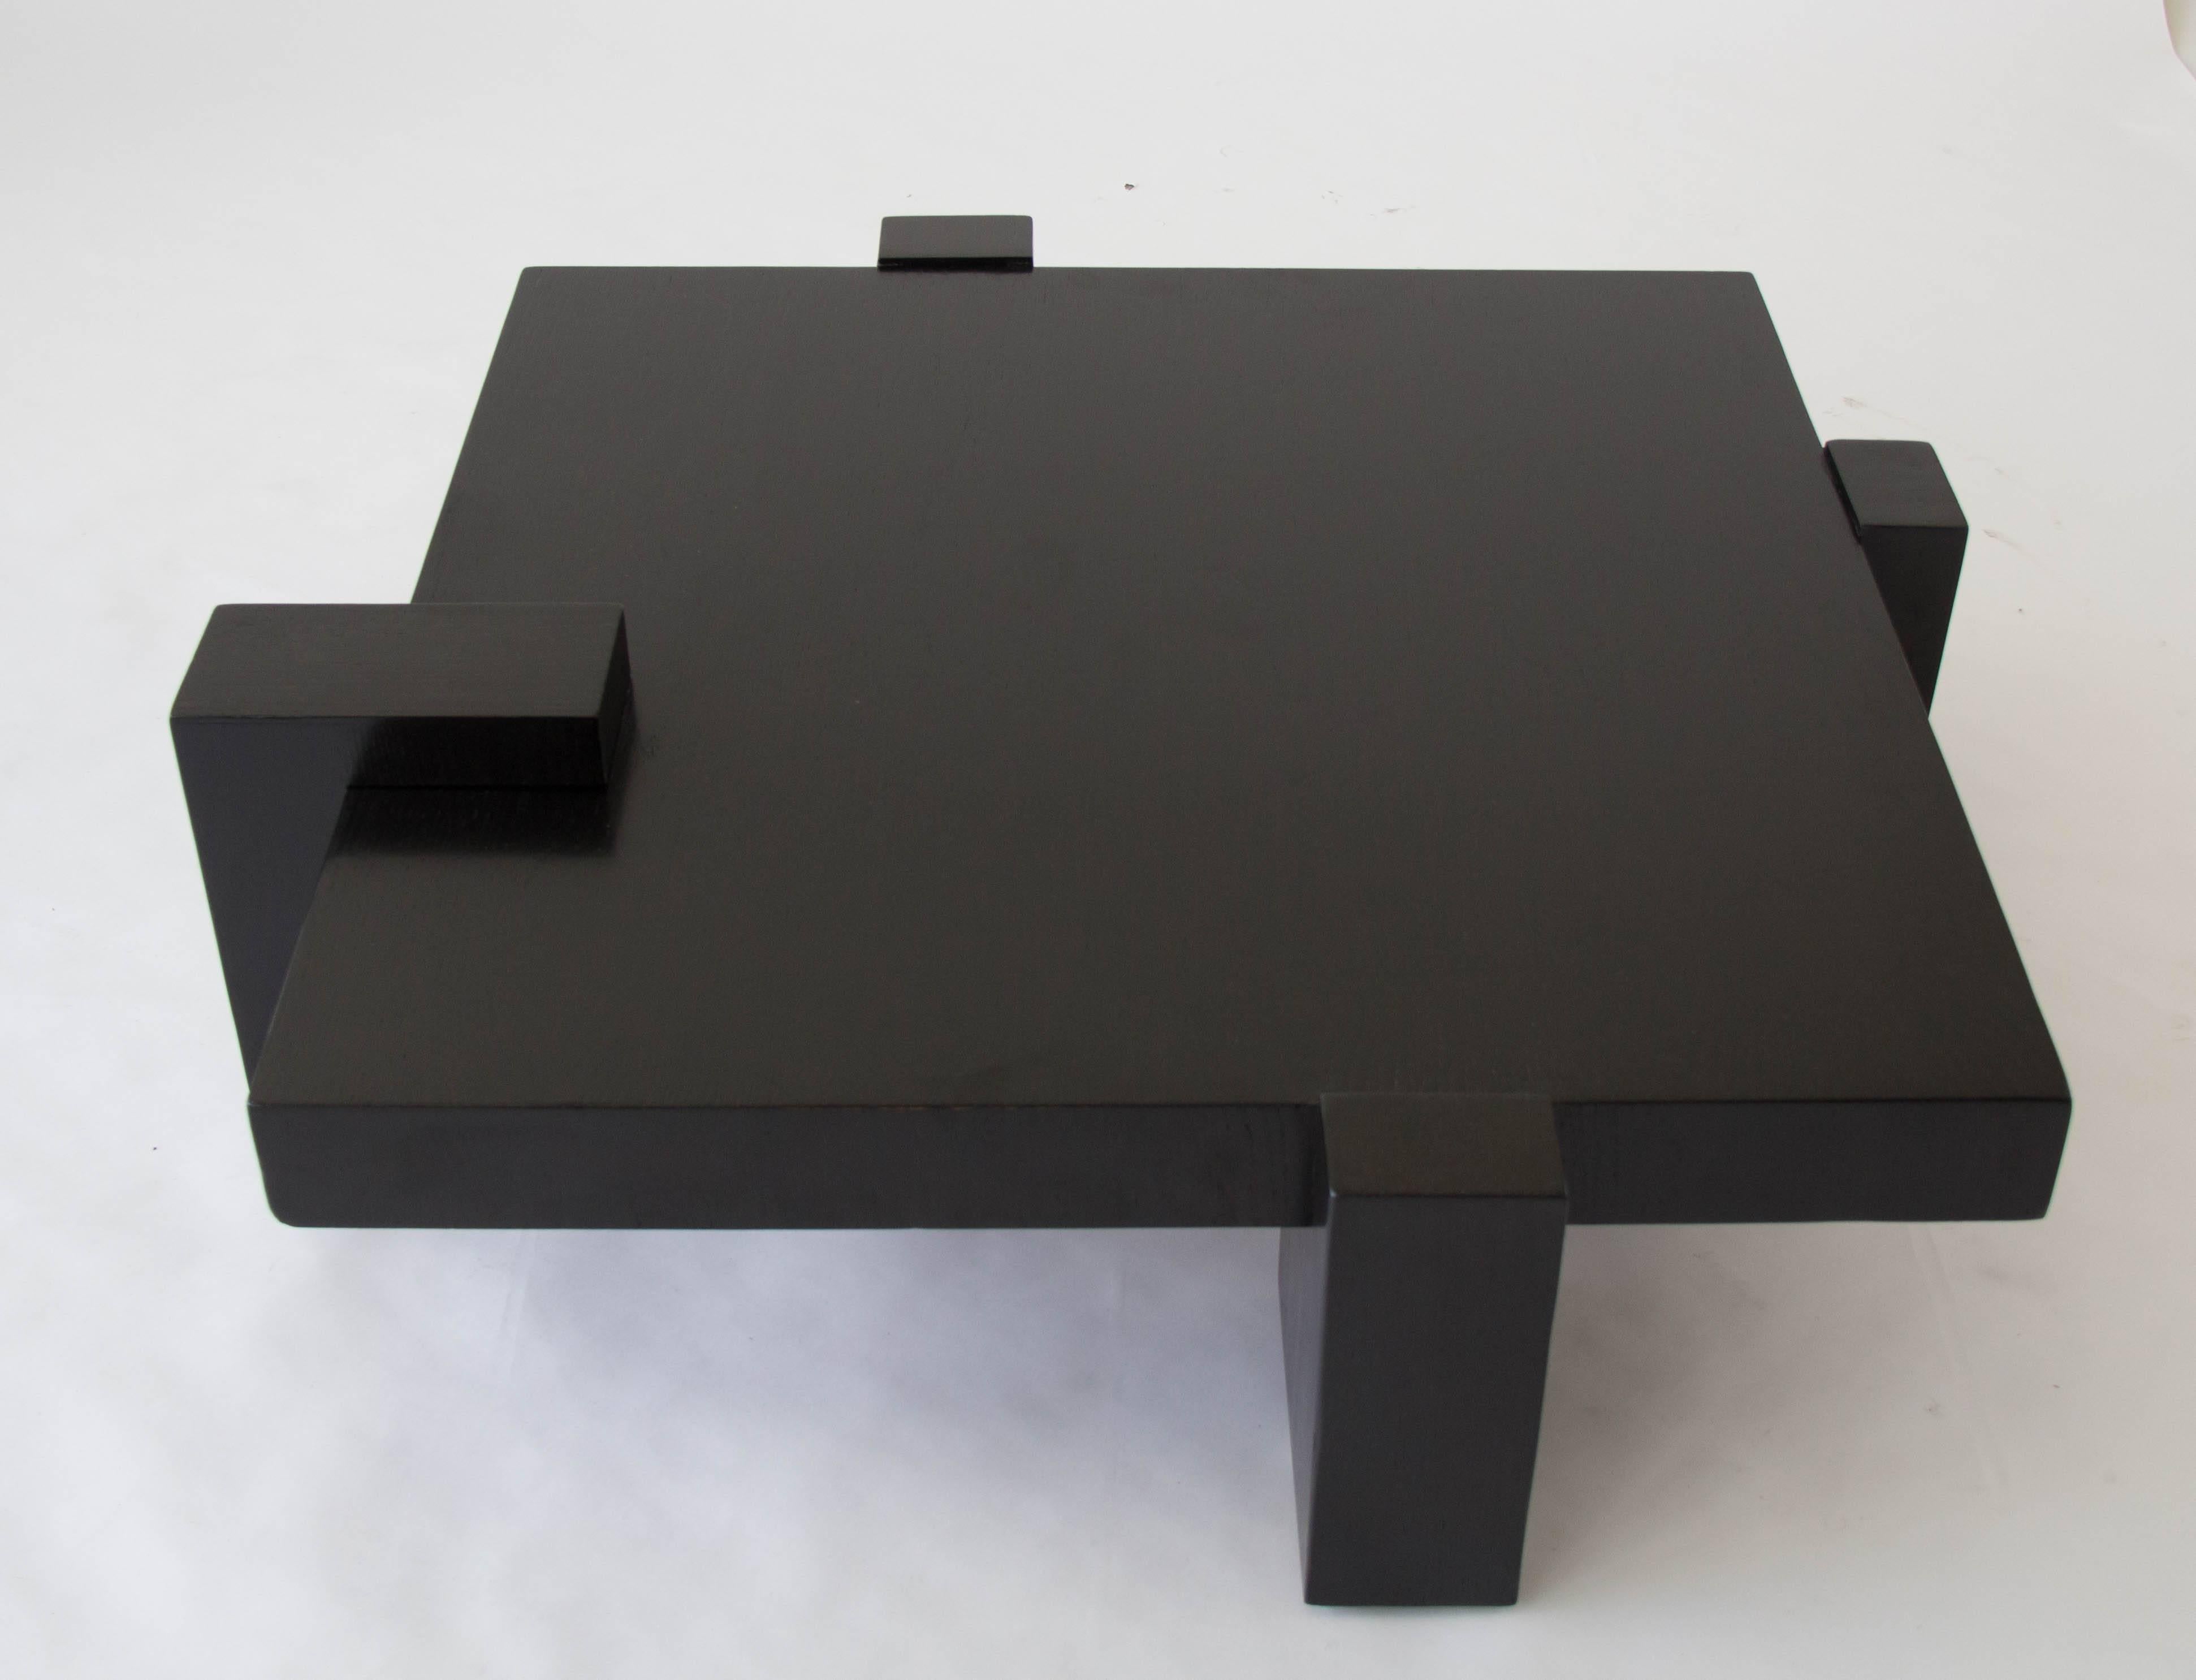 Monumental square coffee table from Kroehler Manufacturing Co. of Naperville, IL. Produced in 1978 the design features a central square slab of ebonized oak, interlocking with four matching support blocks of stylistically irregular height and